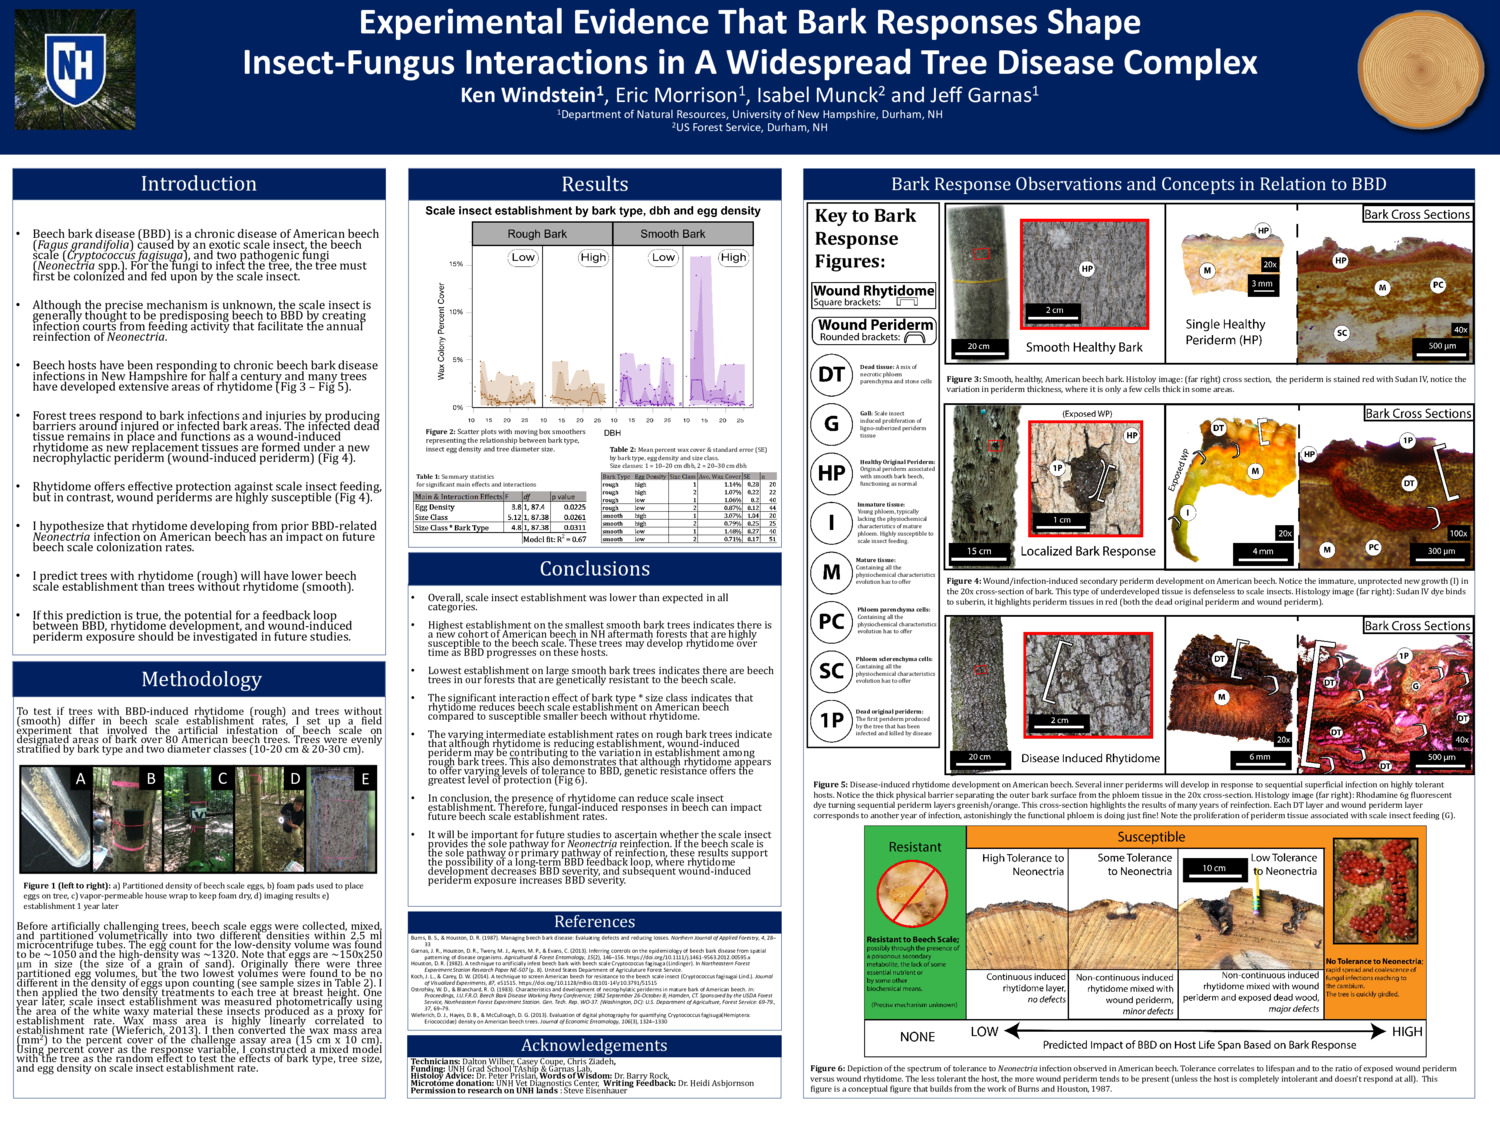 Experimental Evidence That Bark Responses To Infection Shape Insect-Fungus Interactions In A Widespread Tree Disease Complex by kzw1002